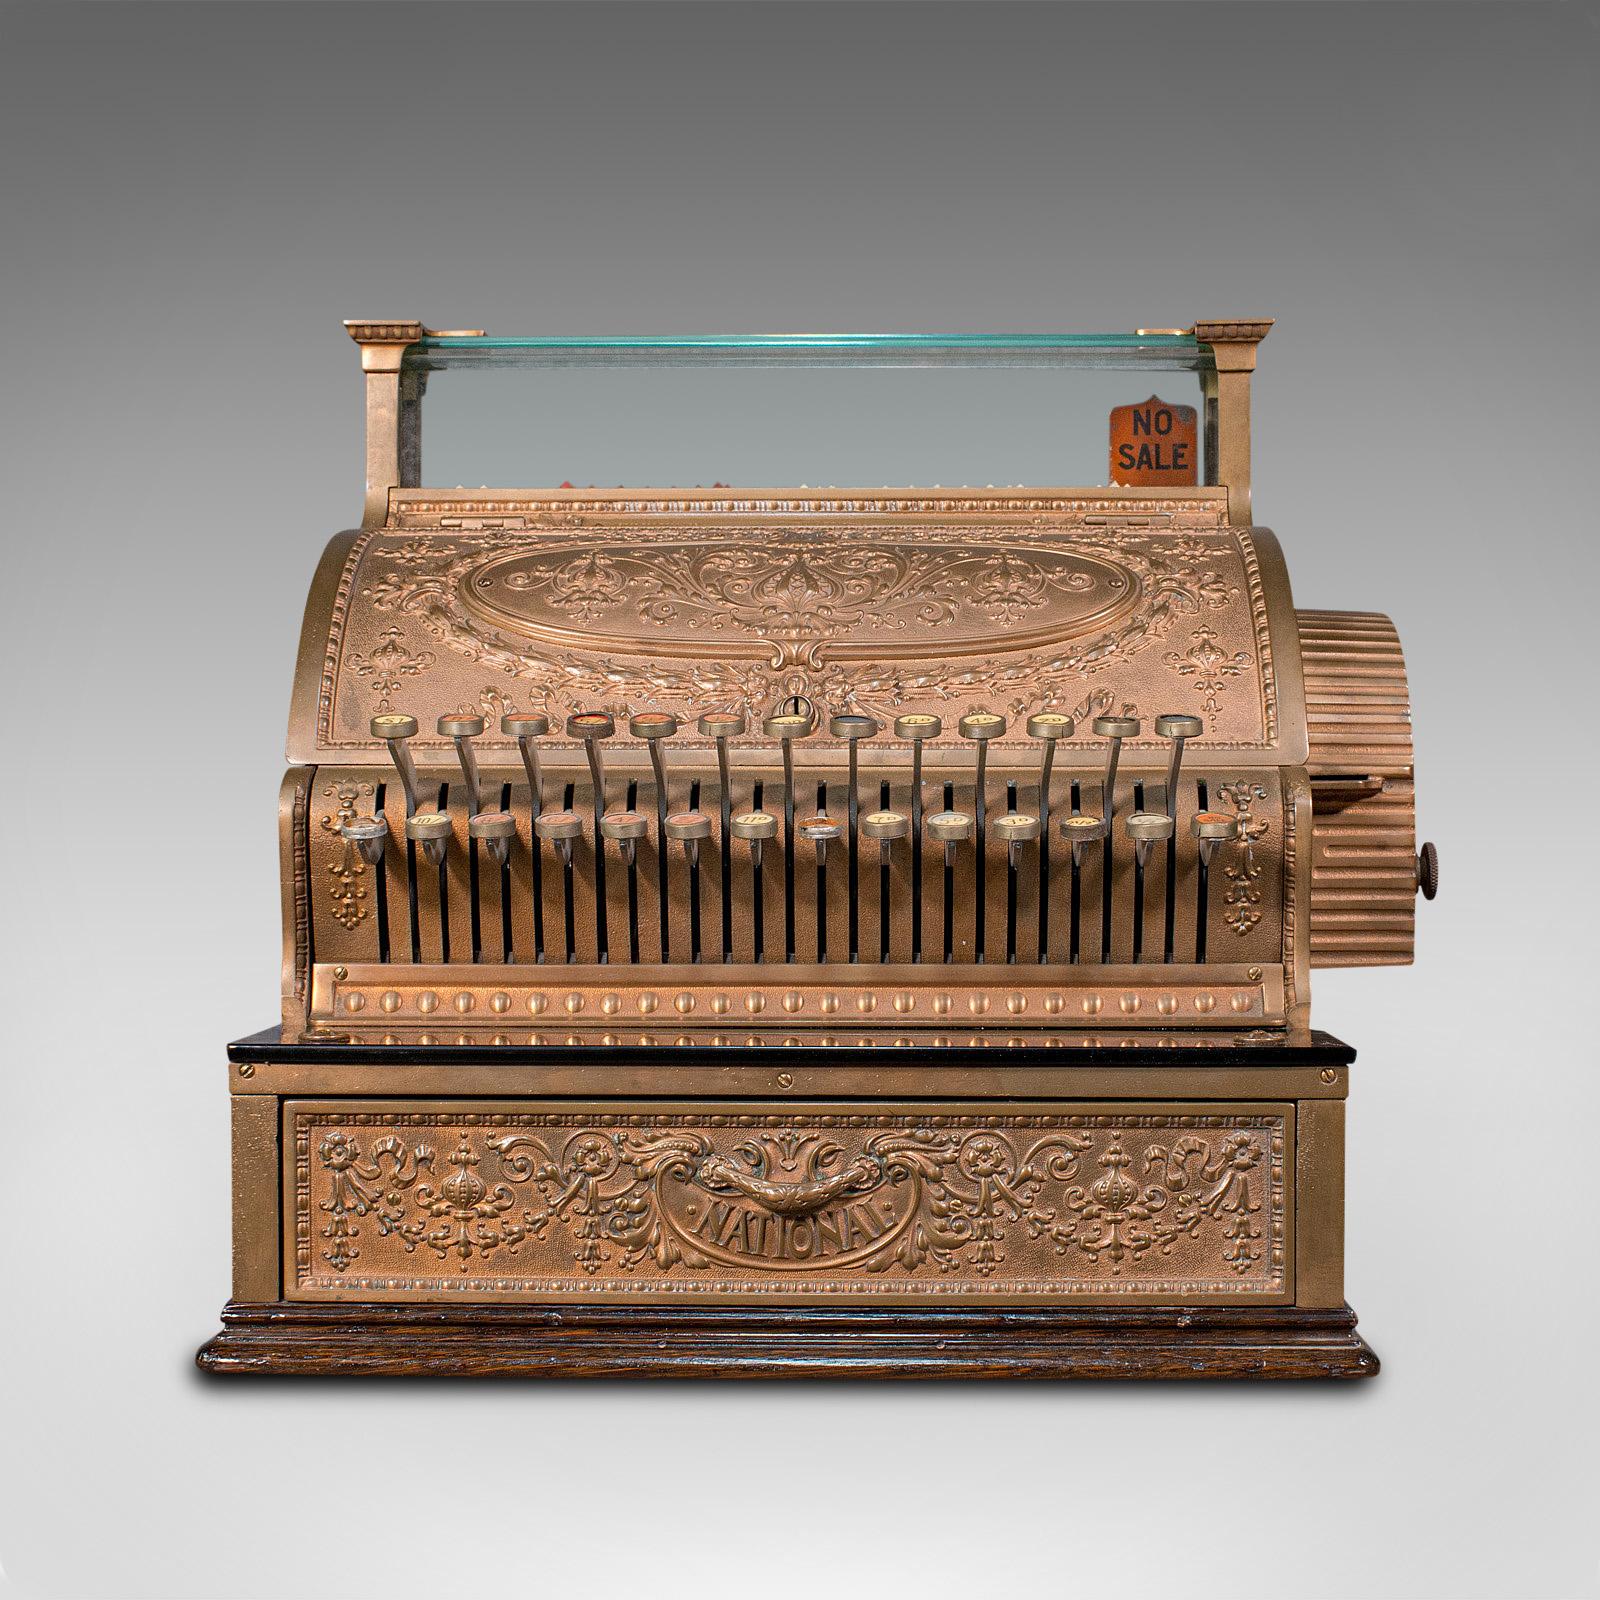 This is an antique countertop cash register. An American, decorative bronze Pound Sterling shop till by National Cash Register of Ohio, dating to the Edwardian period with a 1905 serial number.

Strikingly decorative antique cash register